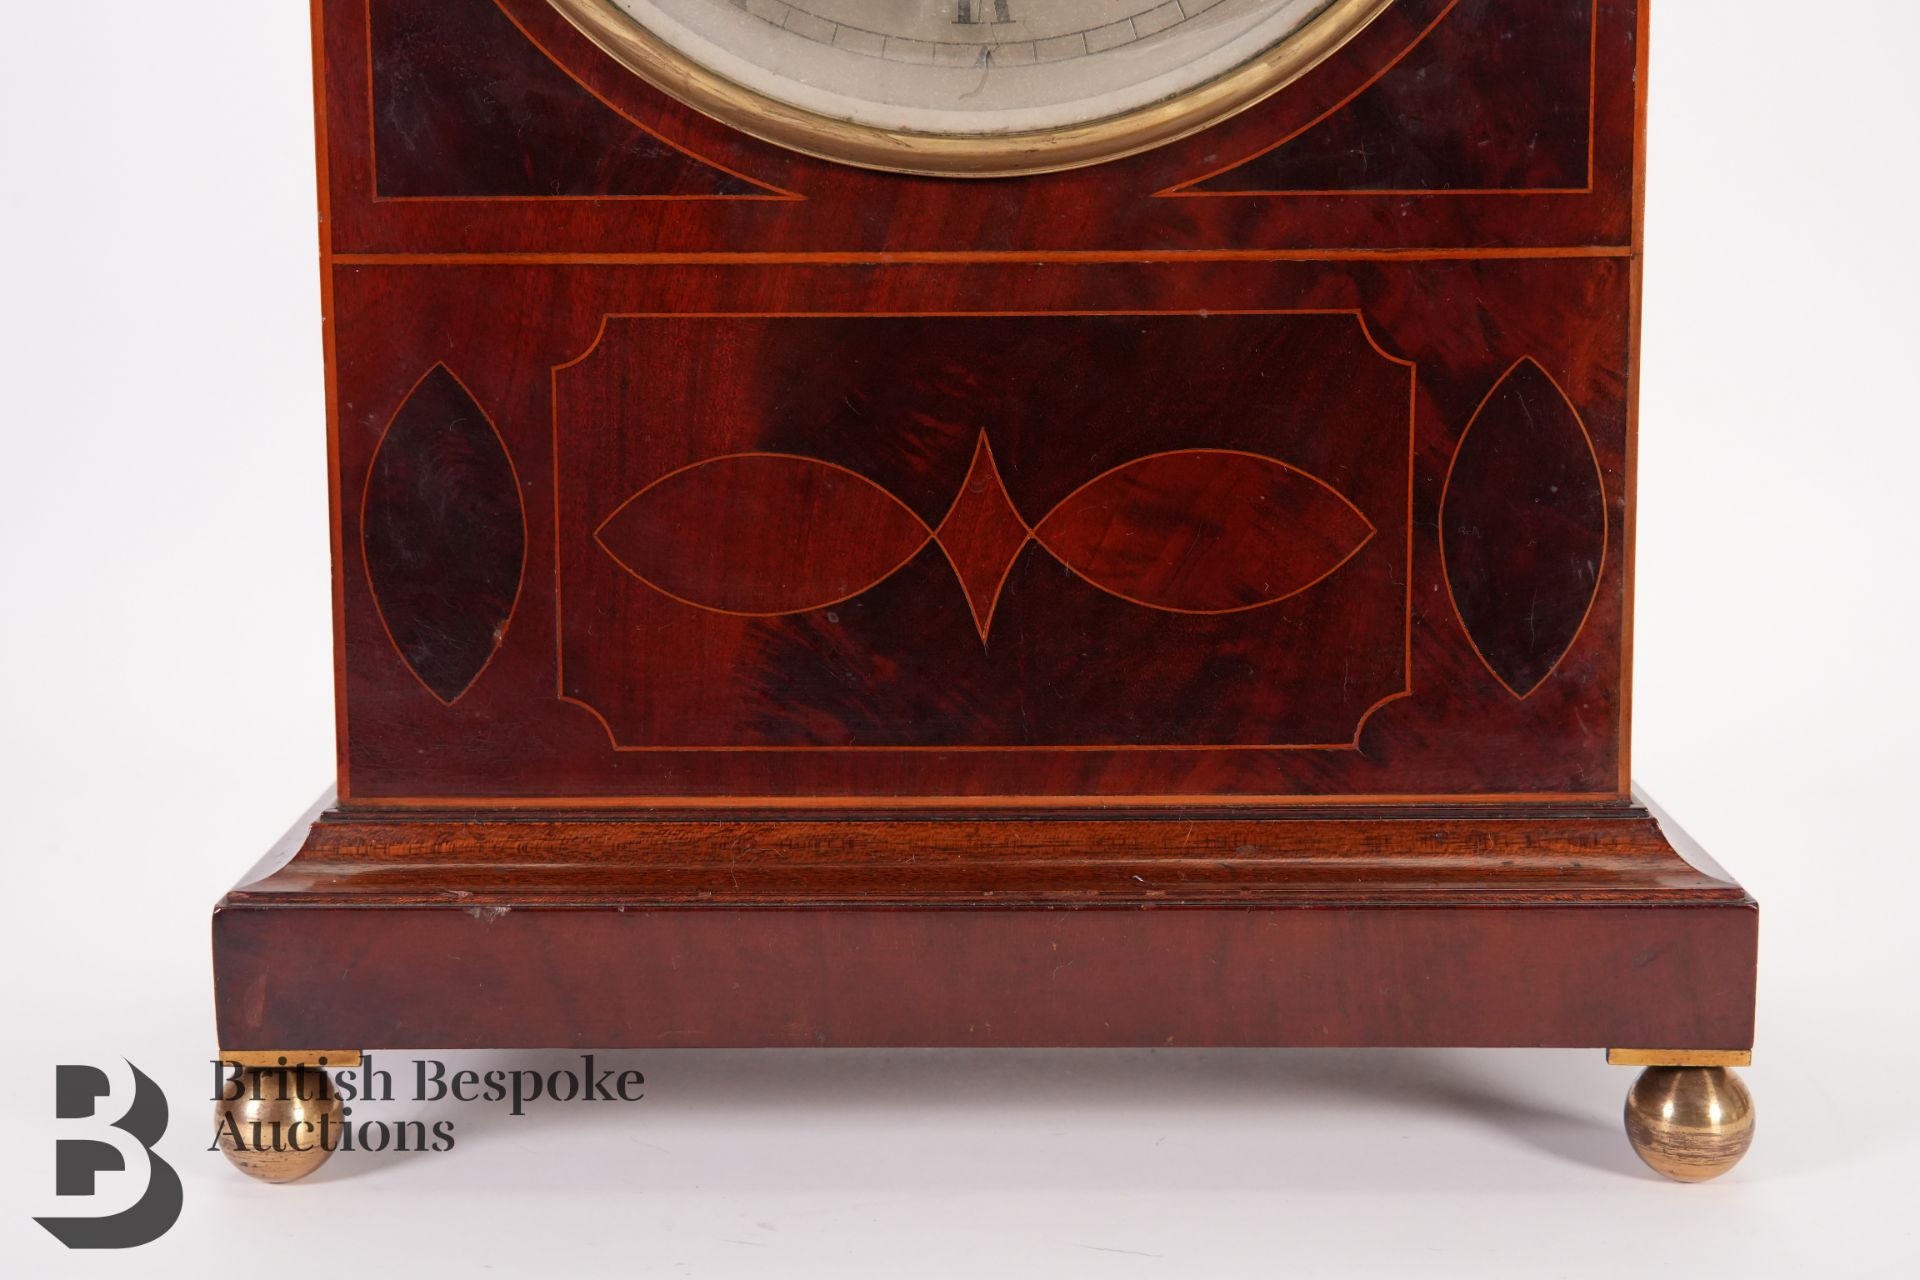 West Country Bracket Clock - Image 2 of 6